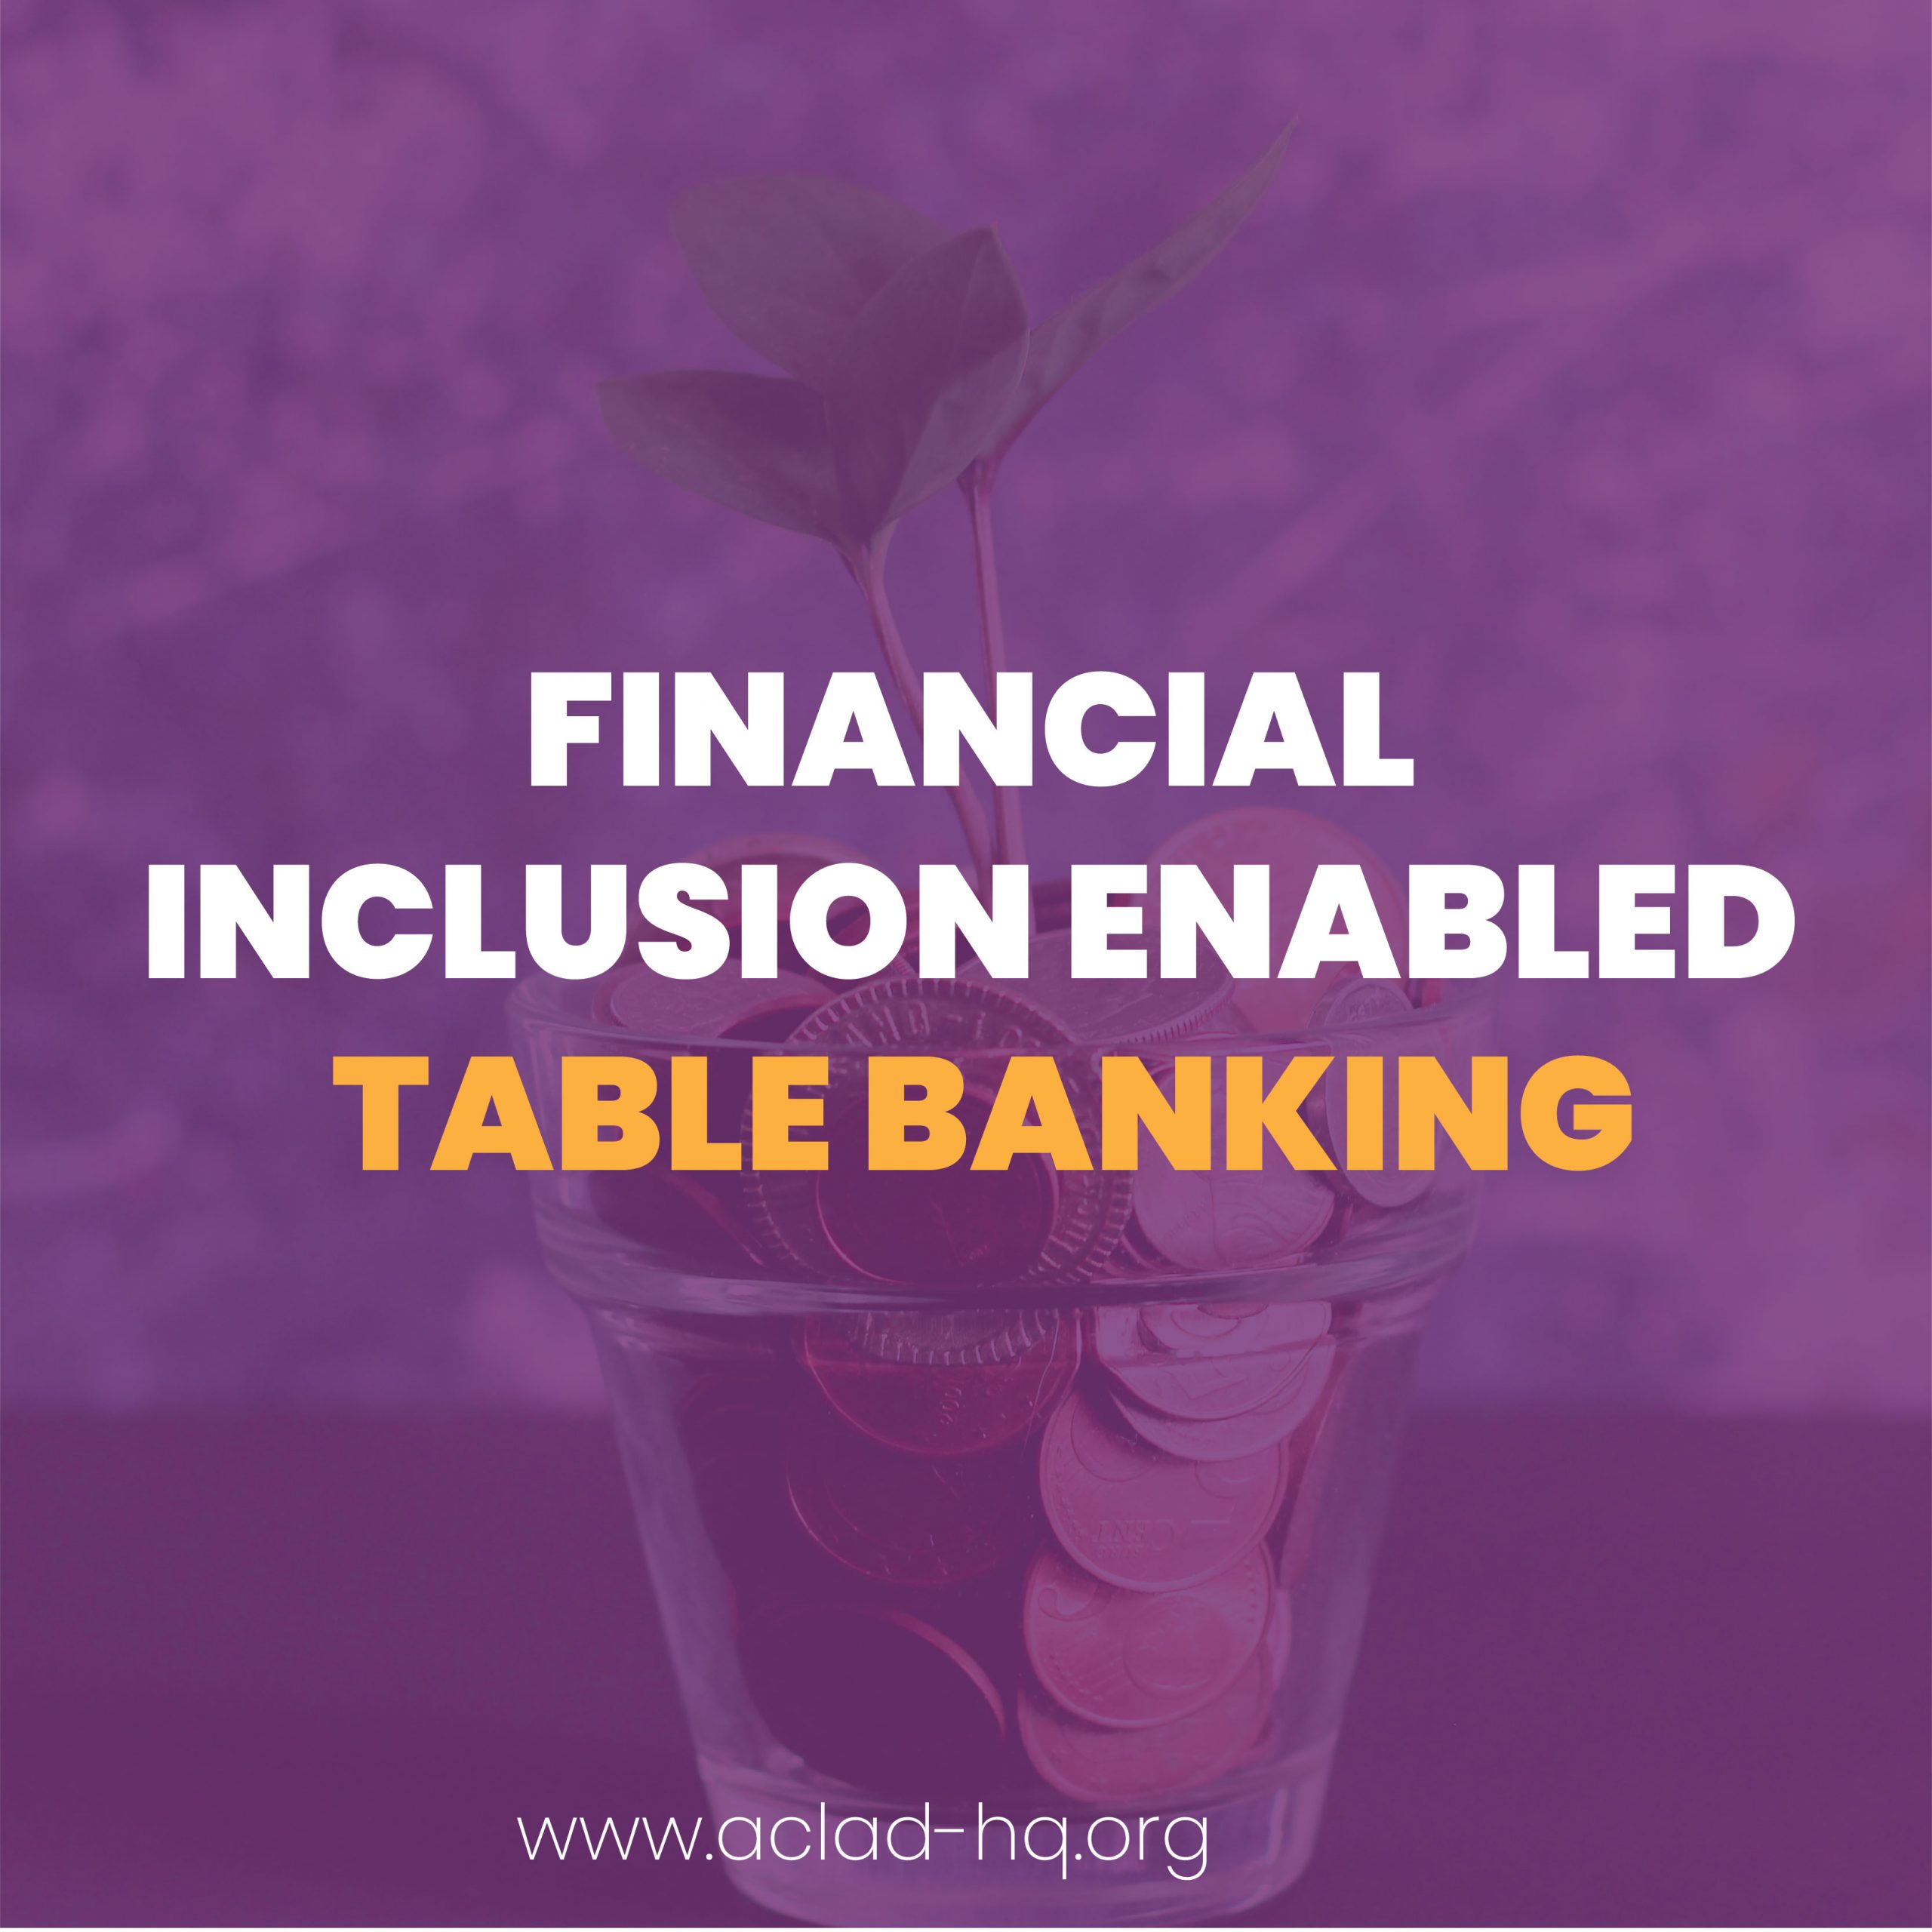 Financial inclusion enabled through table banking